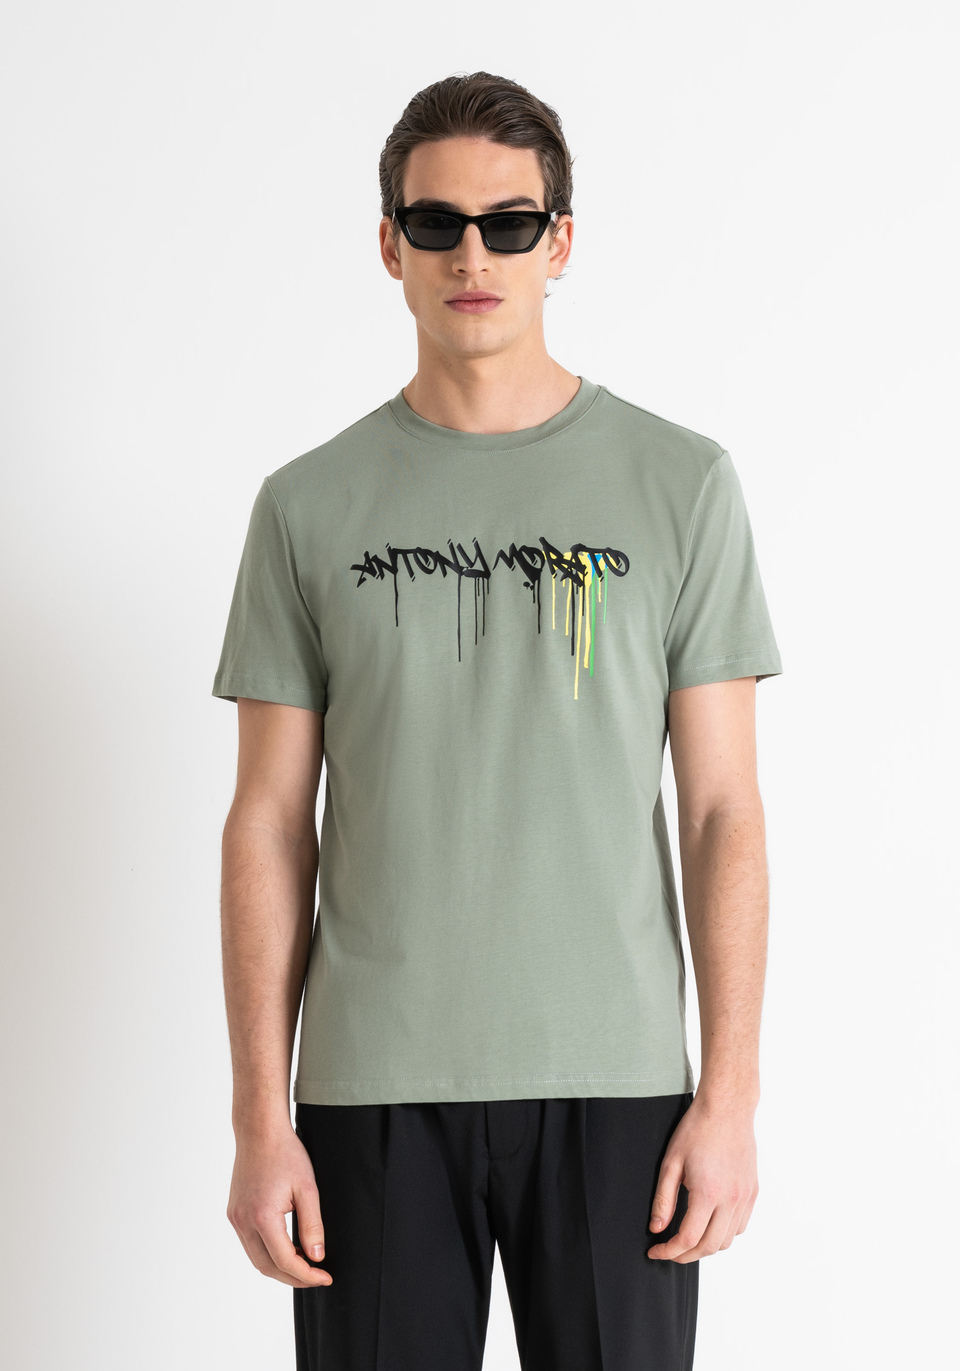 SLIM FIT T-SHIRT IN COTTON JERSEY WITH MATT PLASTIC LOGO PRINT AND RUBBERIZED INJECTION - Antony Morato Online Shop